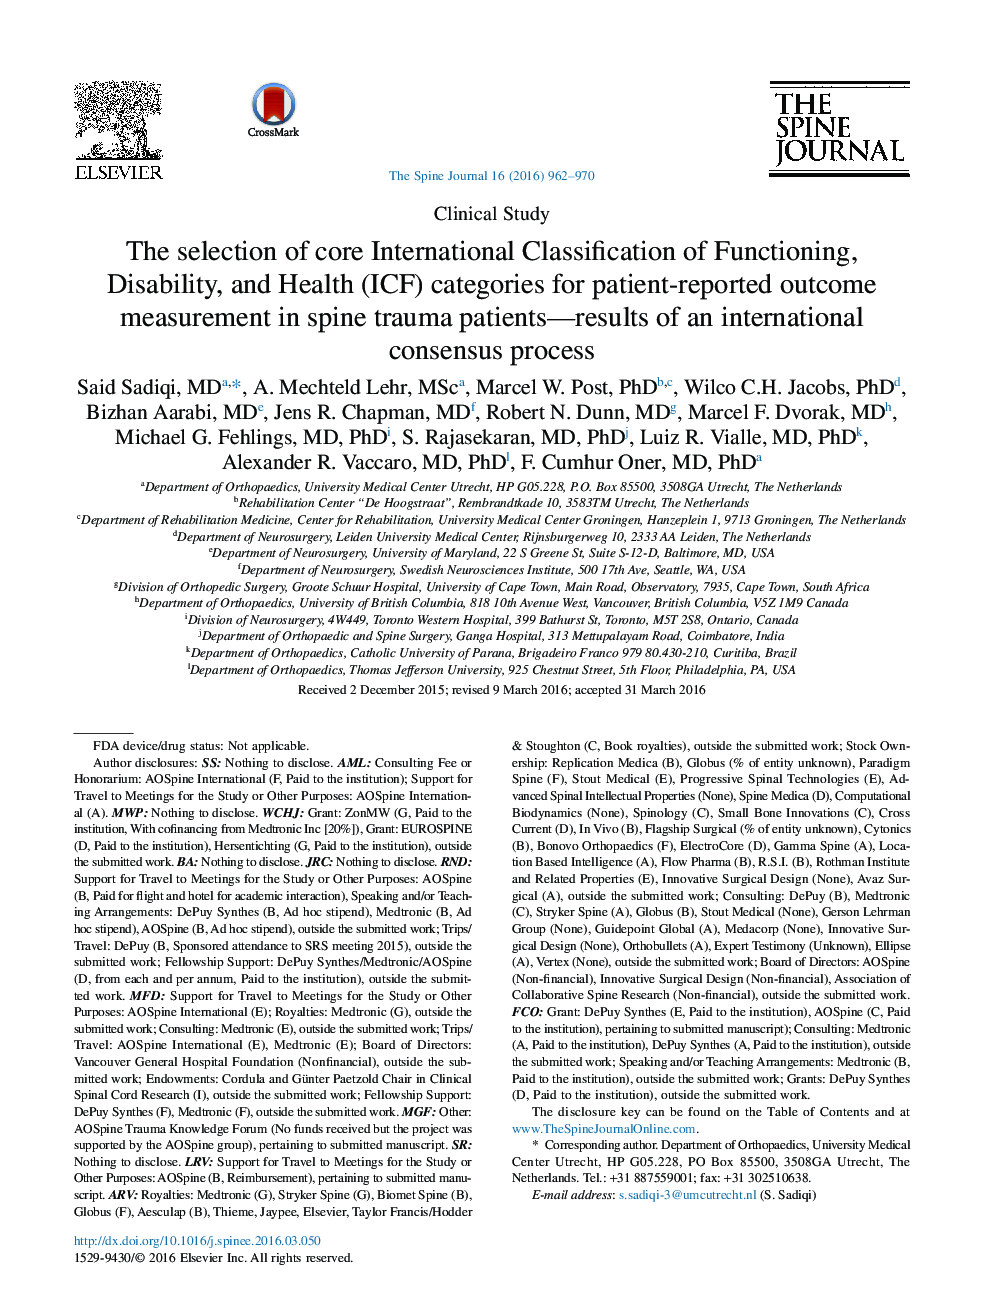 The selection of core International Classification of Functioning, Disability, and Health (ICF) categories for patient-reported outcome measurement in spine trauma patients—results of an international consensus process 